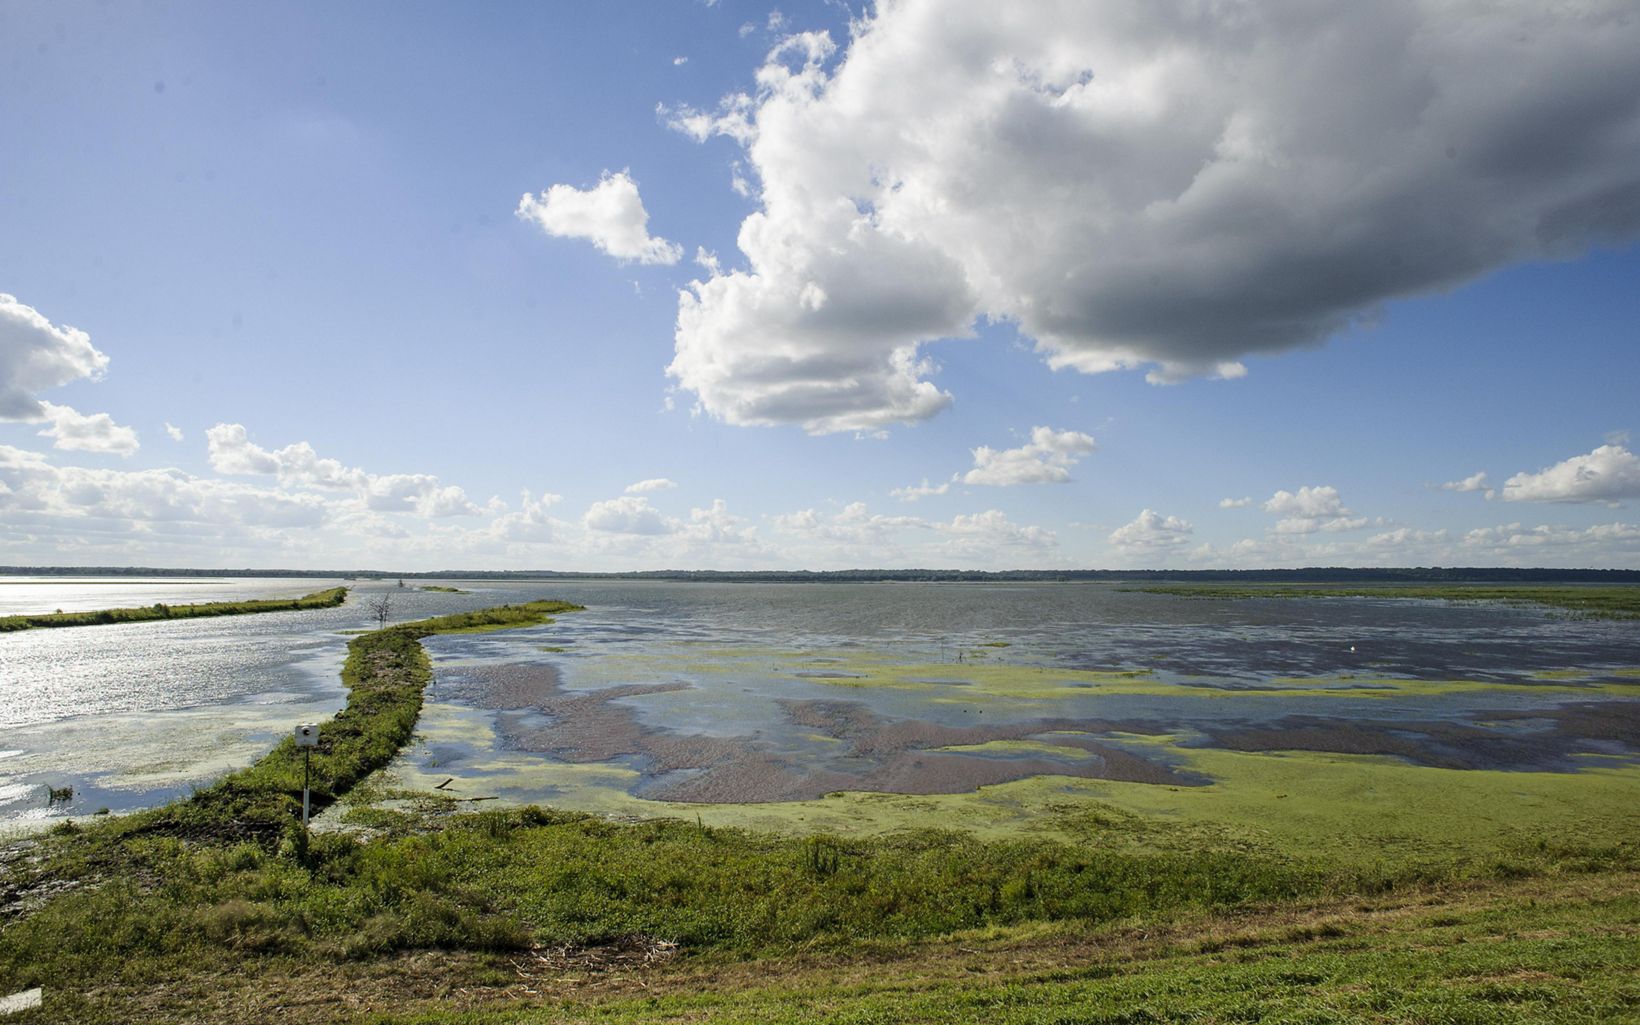 A landscape shot of Emiquon wetlands with blue sky and puffy clouds overhead.